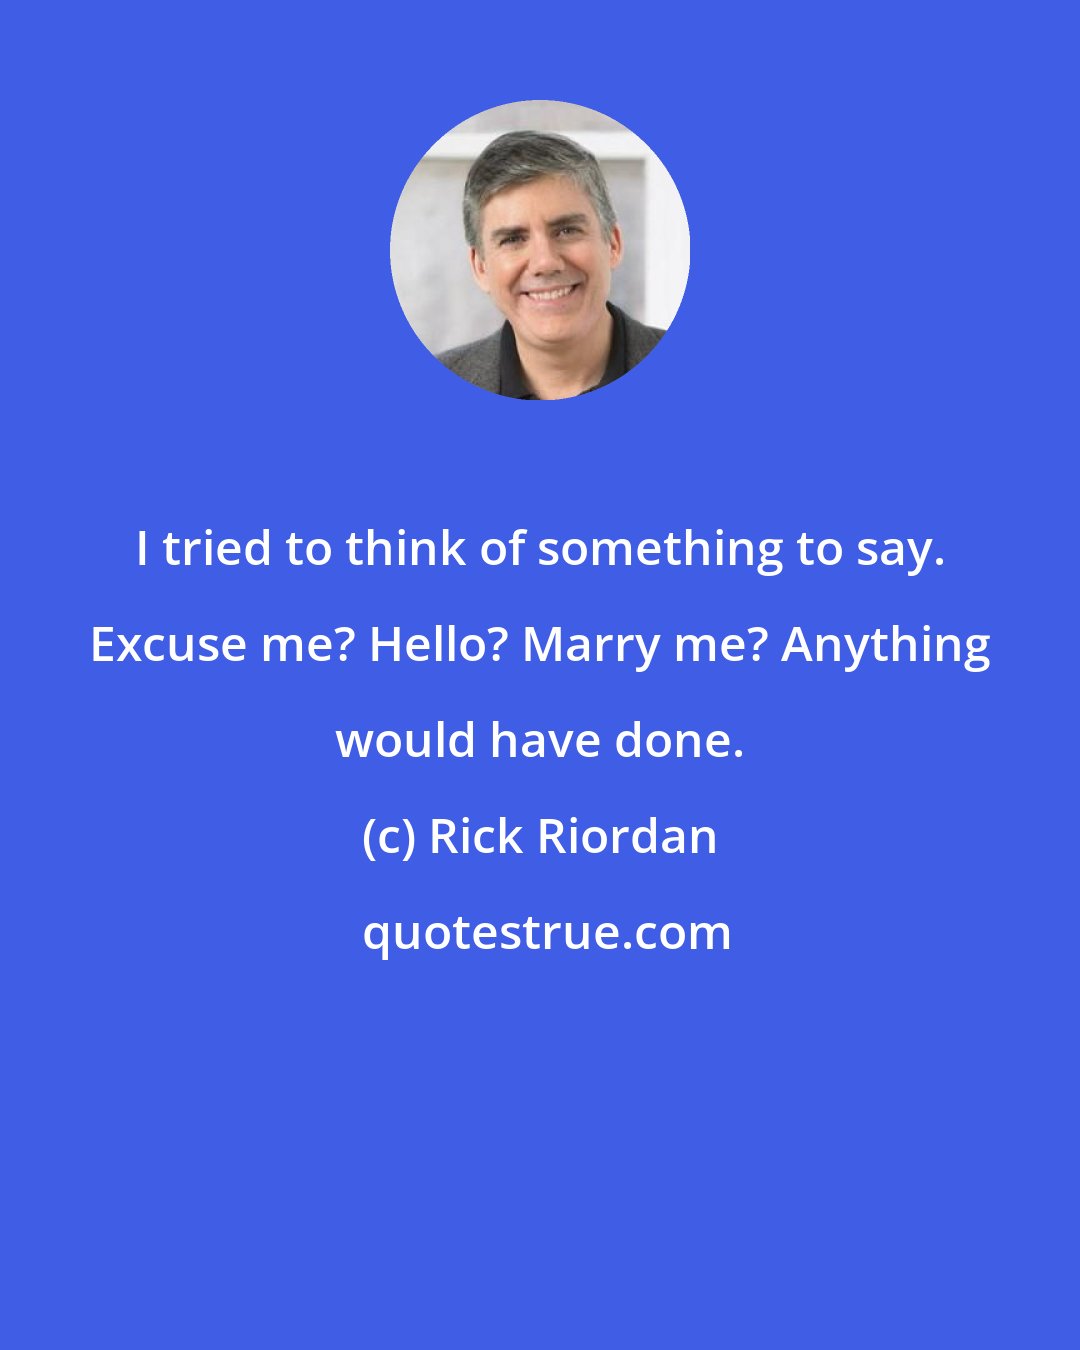 Rick Riordan: I tried to think of something to say. Excuse me? Hello? Marry me? Anything would have done.